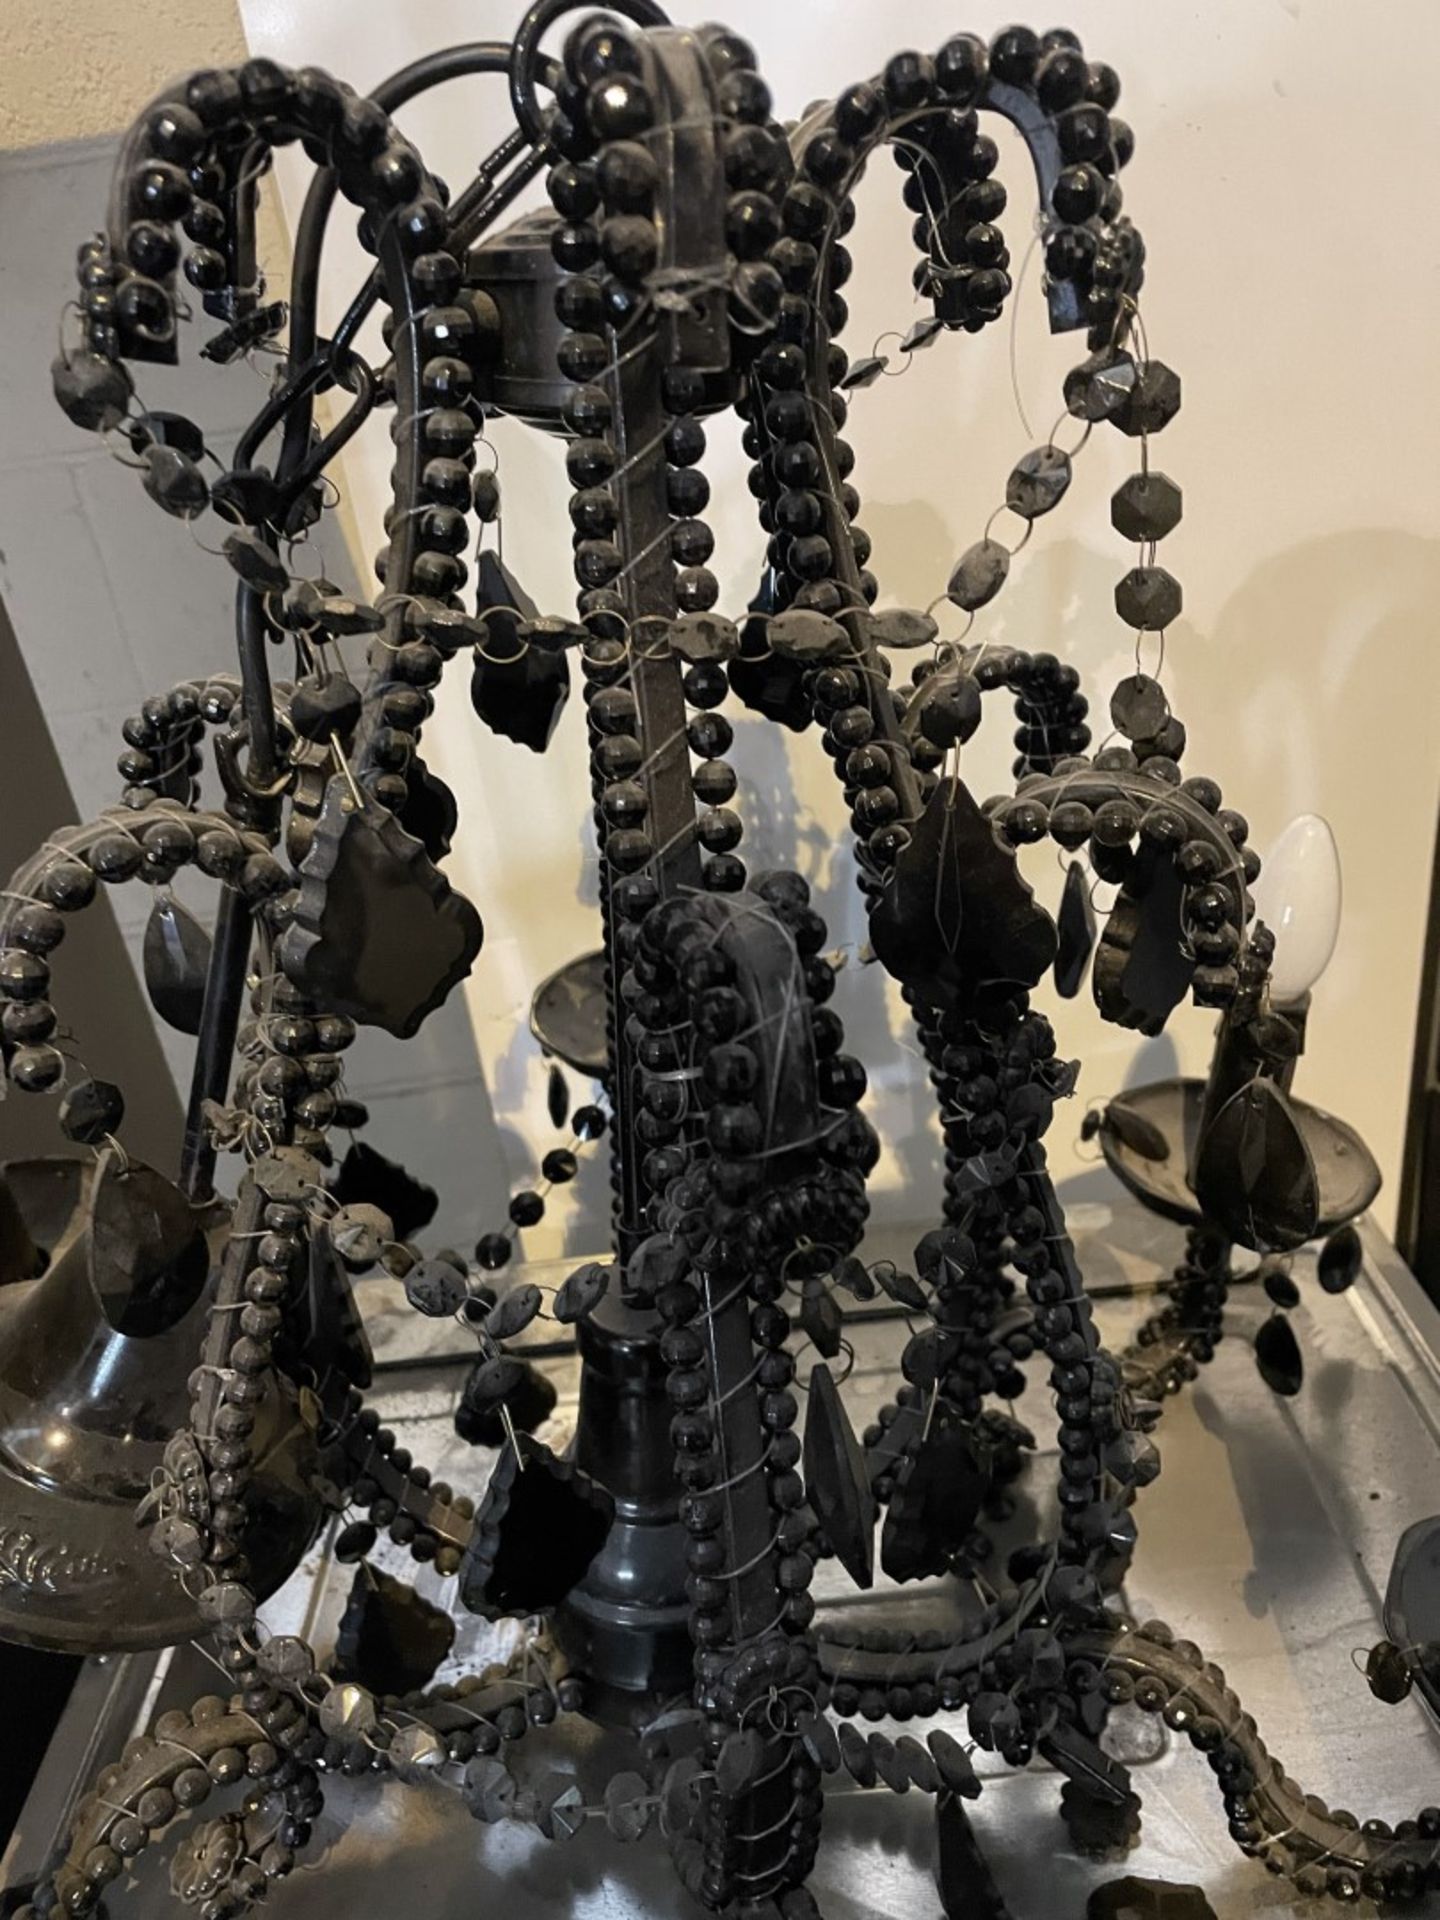 1 x Black Ornate Chandelier - Ref: J122 - CL531 - Location: Essex, RM19 Recently removed from a - Image 3 of 4